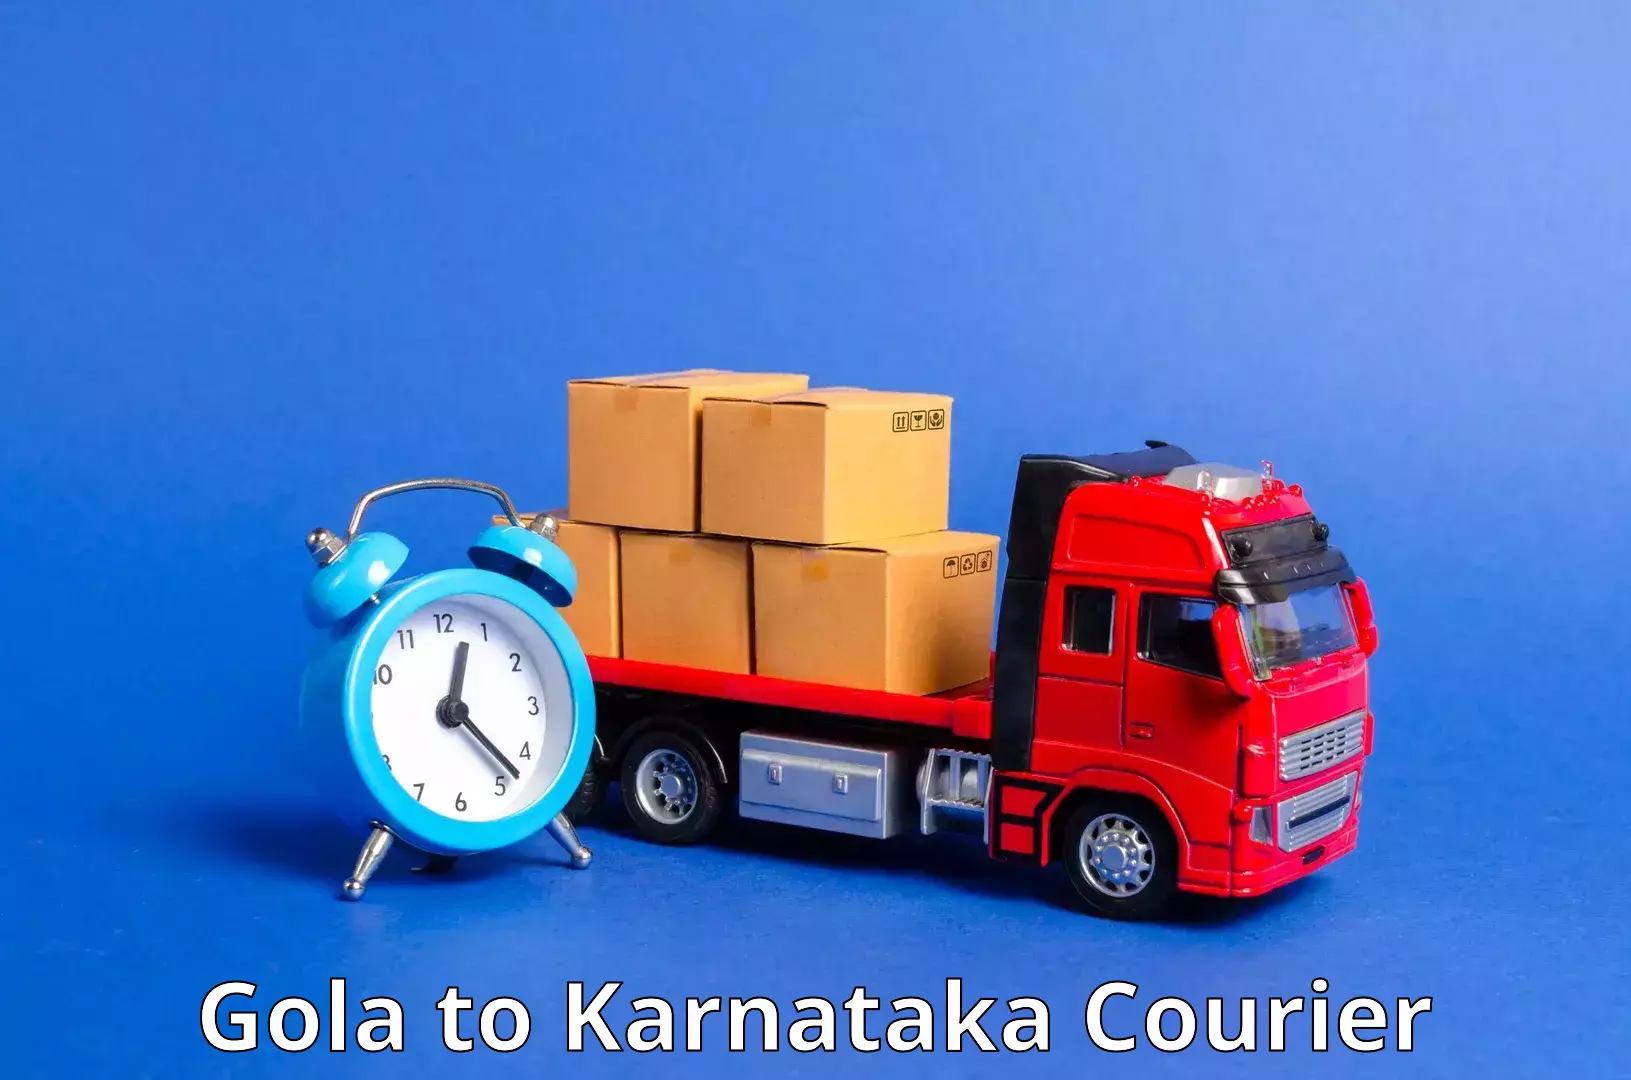 High-performance logistics Gola to Manipal Academy of Higher Education